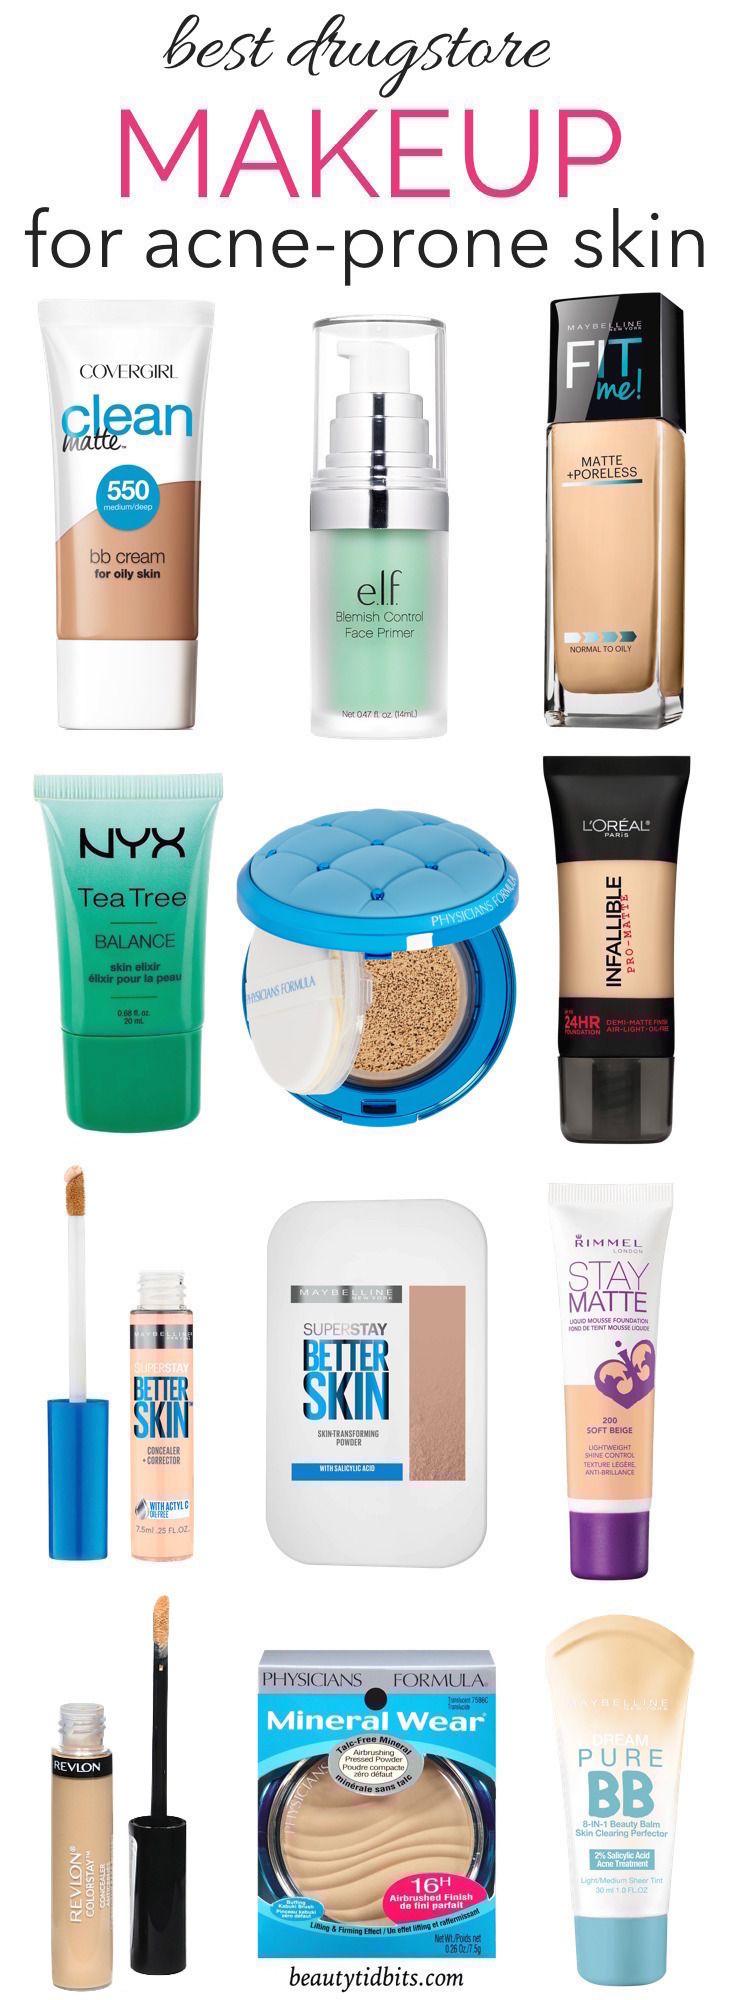 Wedding - Drugstore Makeup Products